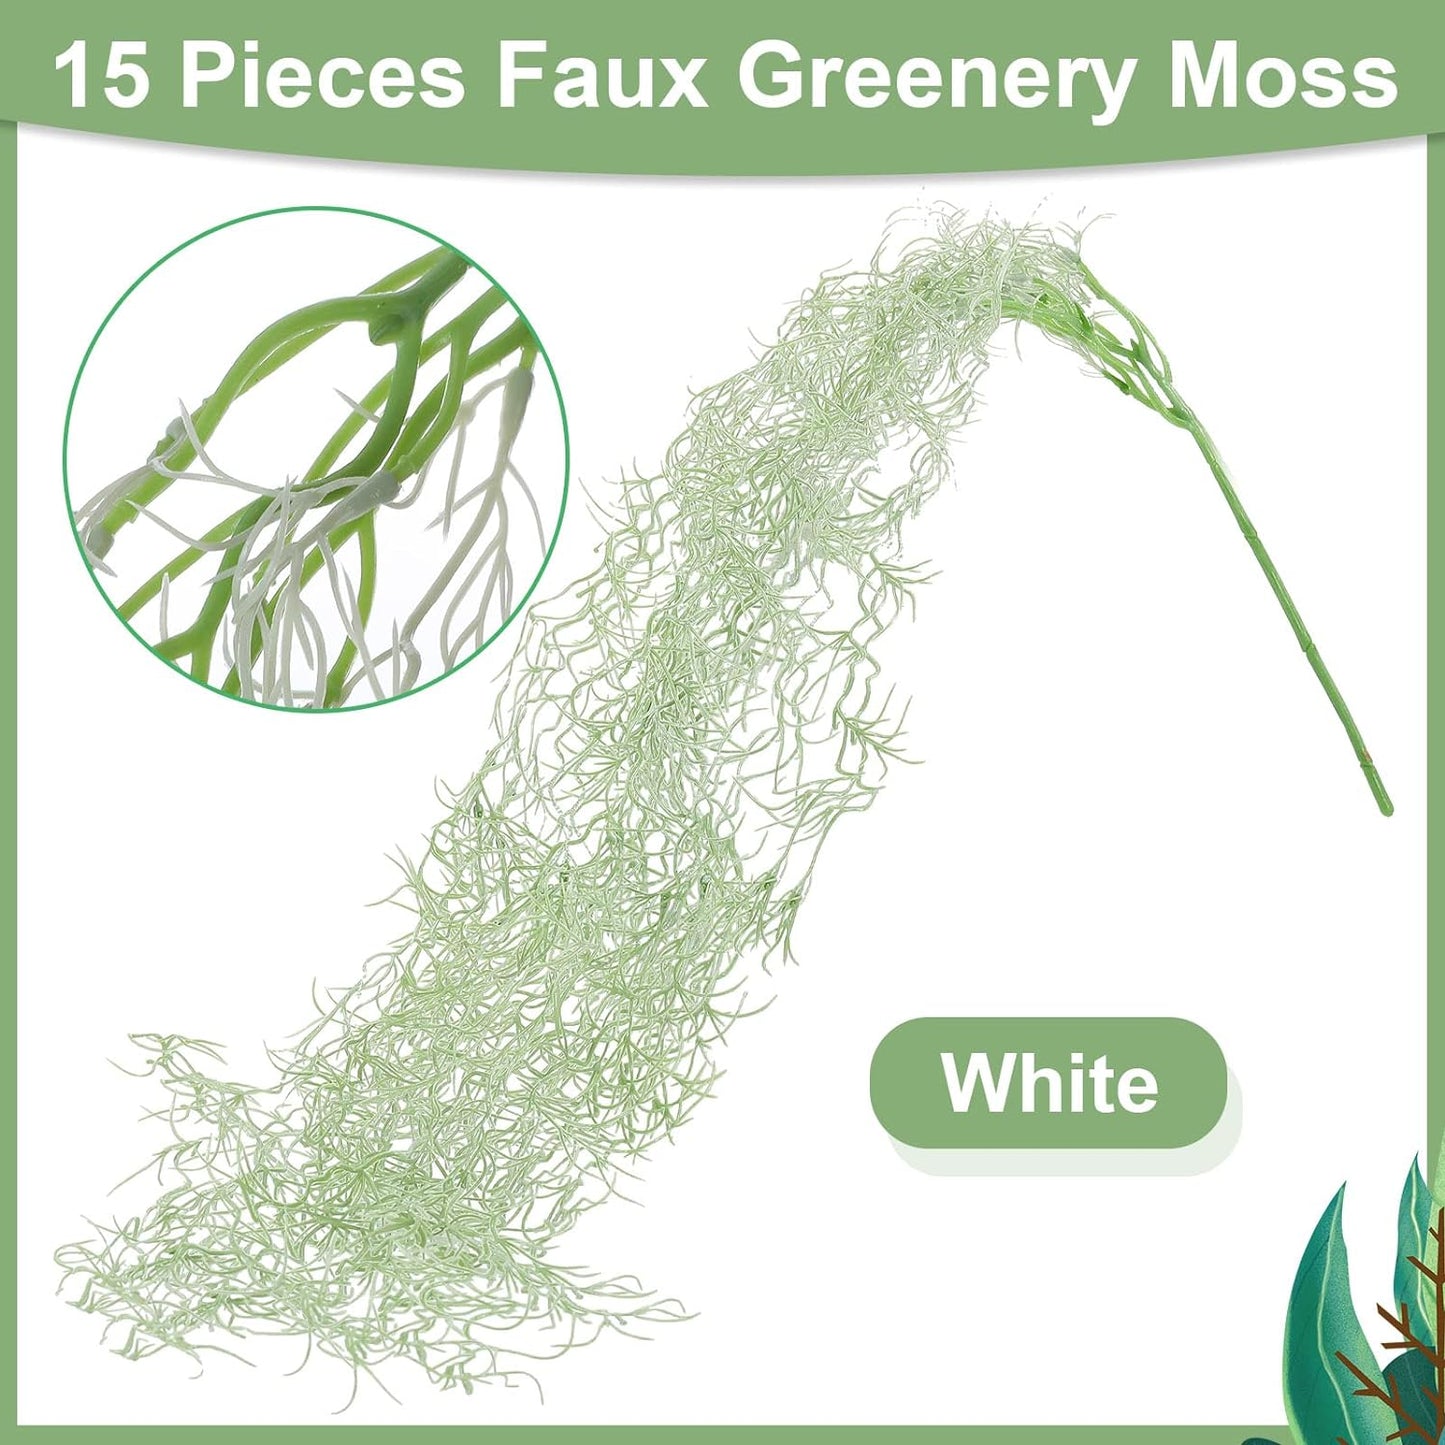 15 Pieces Faux Spanish Greenery Moss for Crafts, Potted Plants & Arrangements